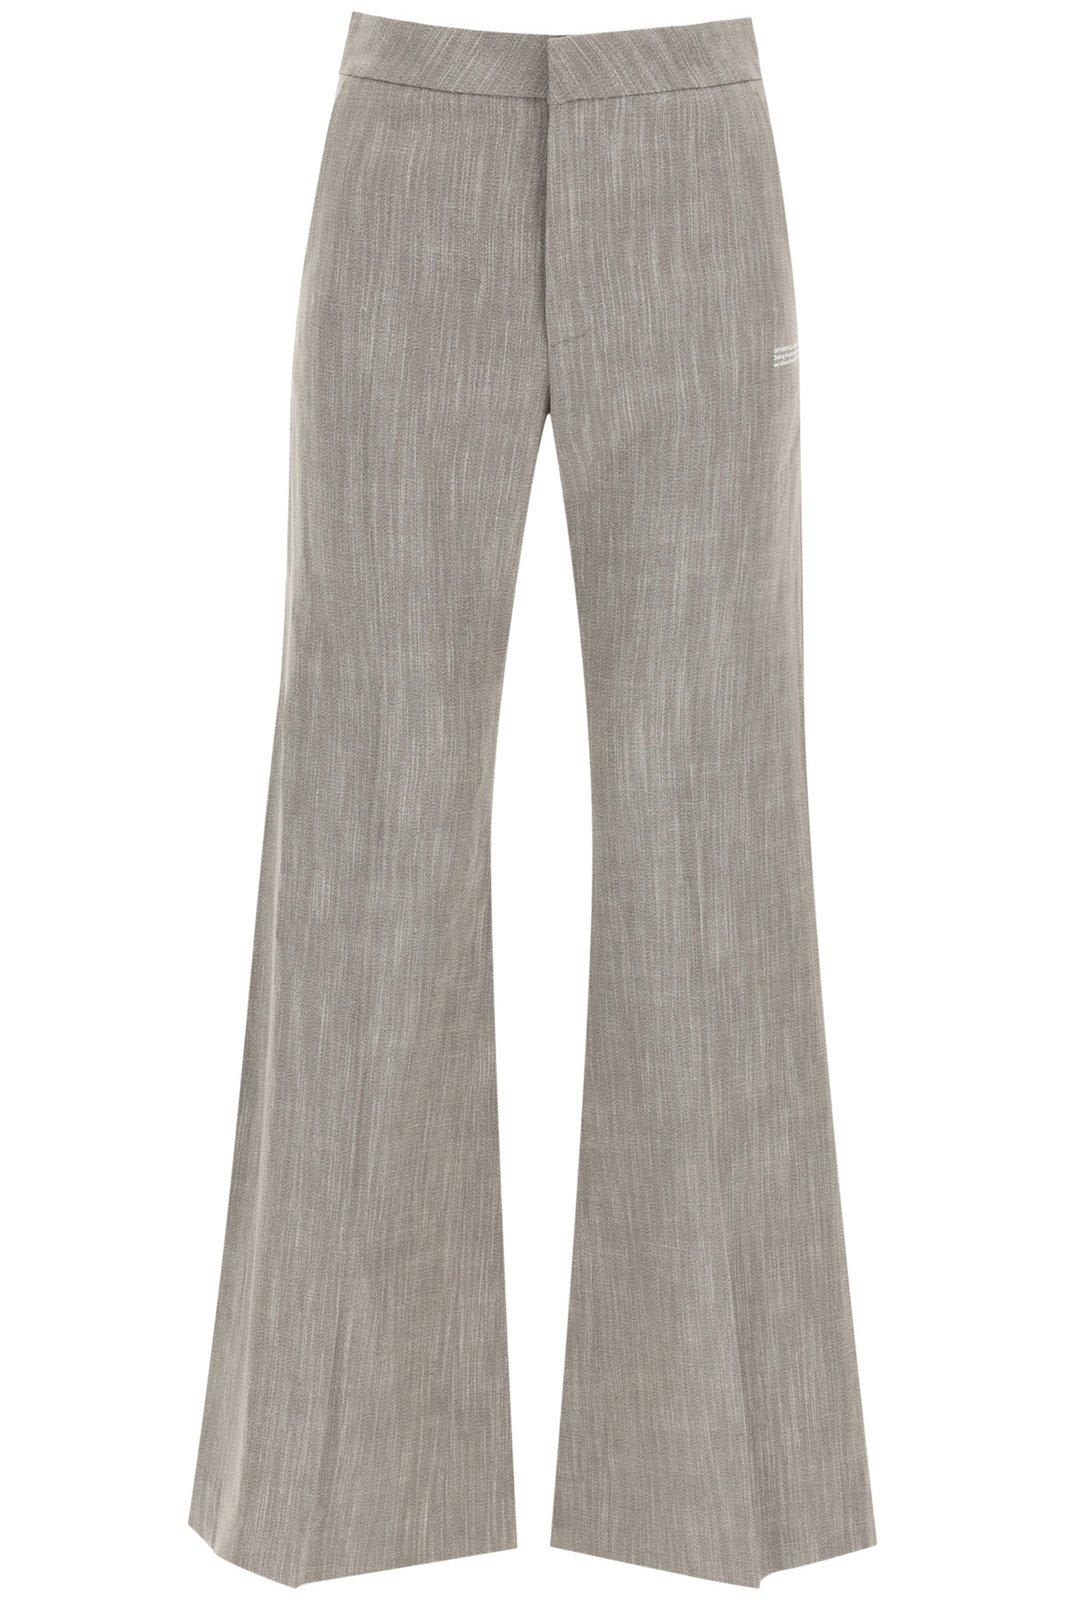 Off-White Draped Flared Trousers